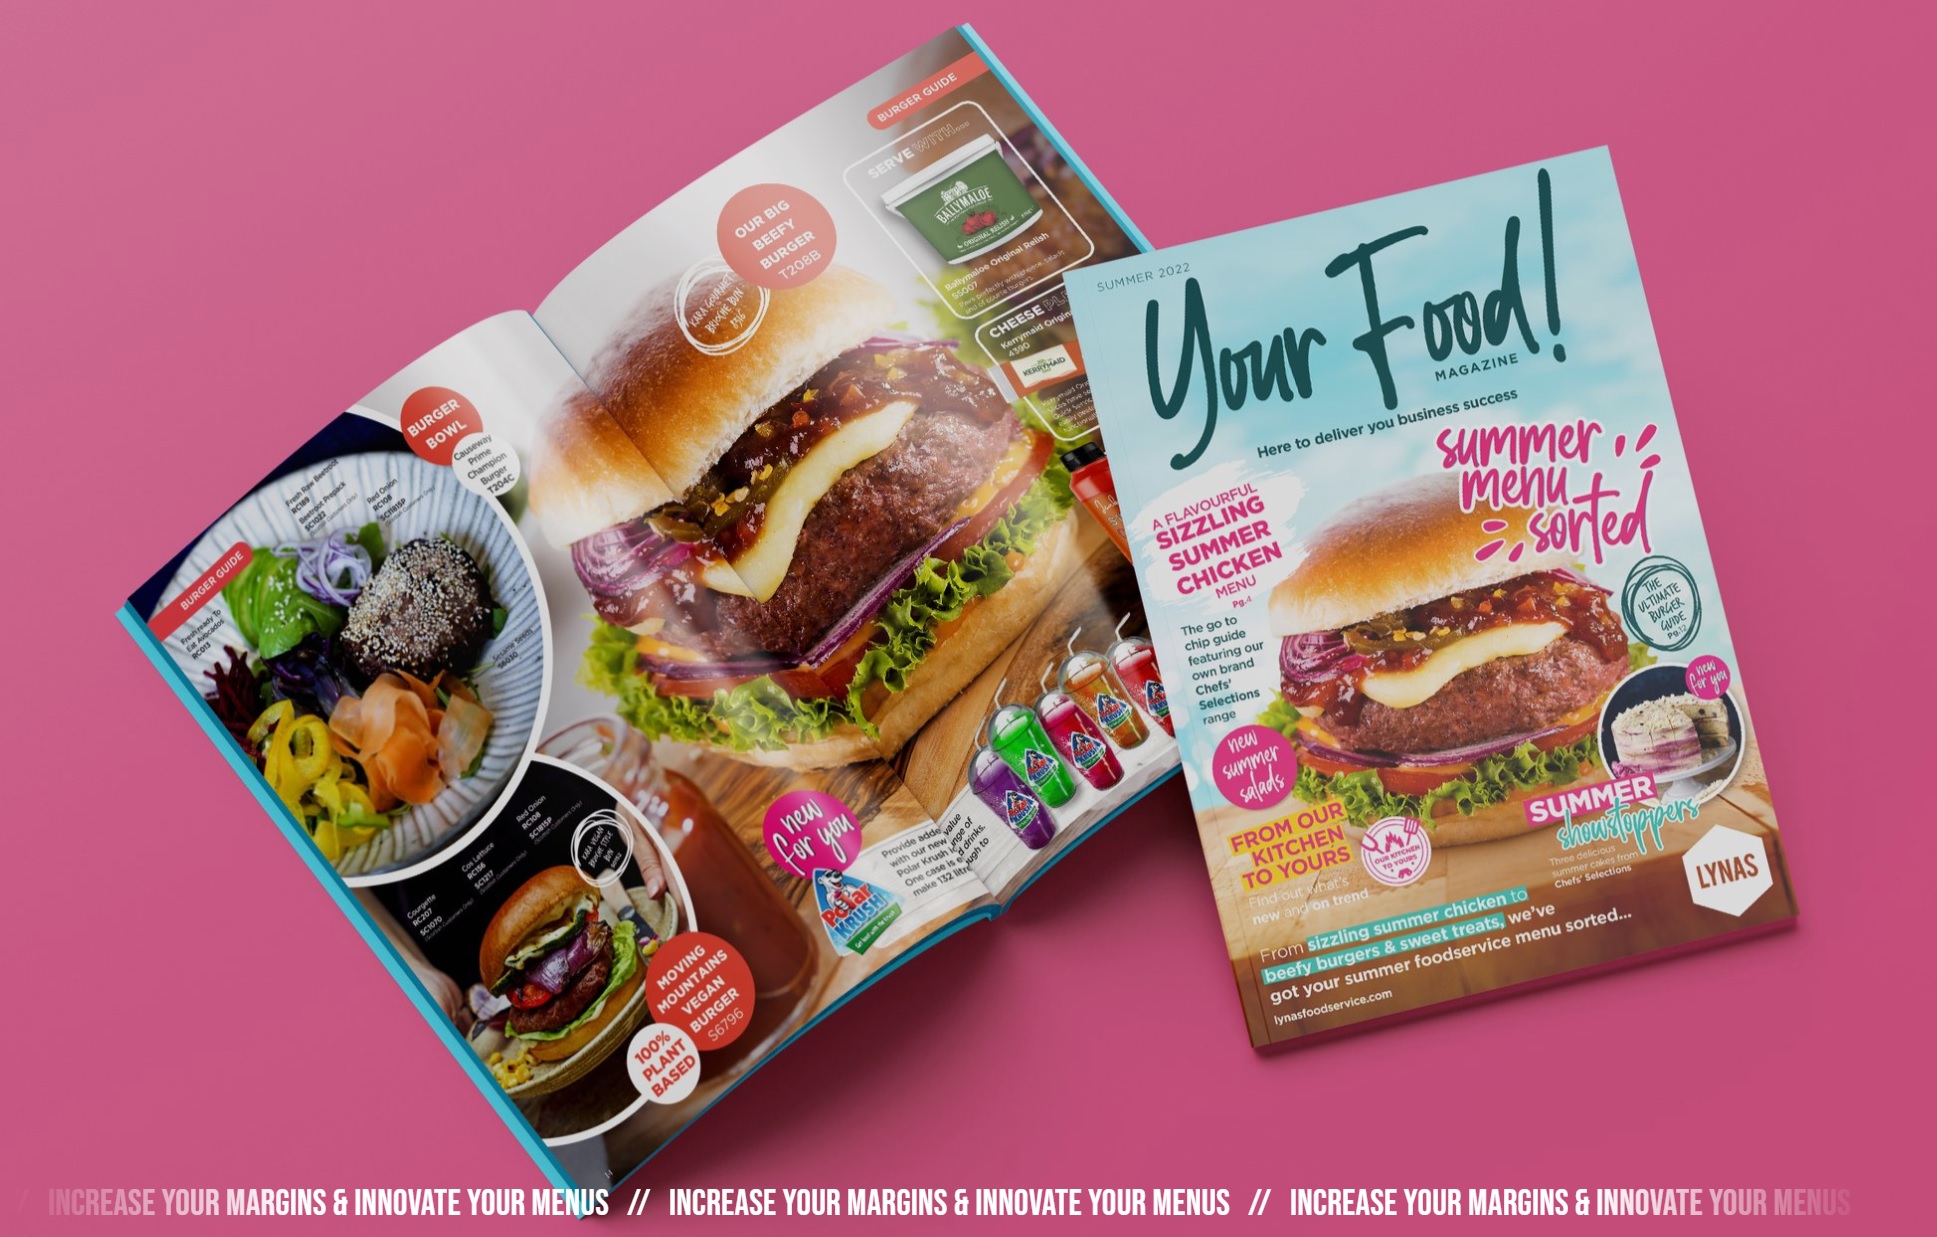 LYNAS FOODSERVICE LAUNCHES YOUR FOOD MAGAZINE